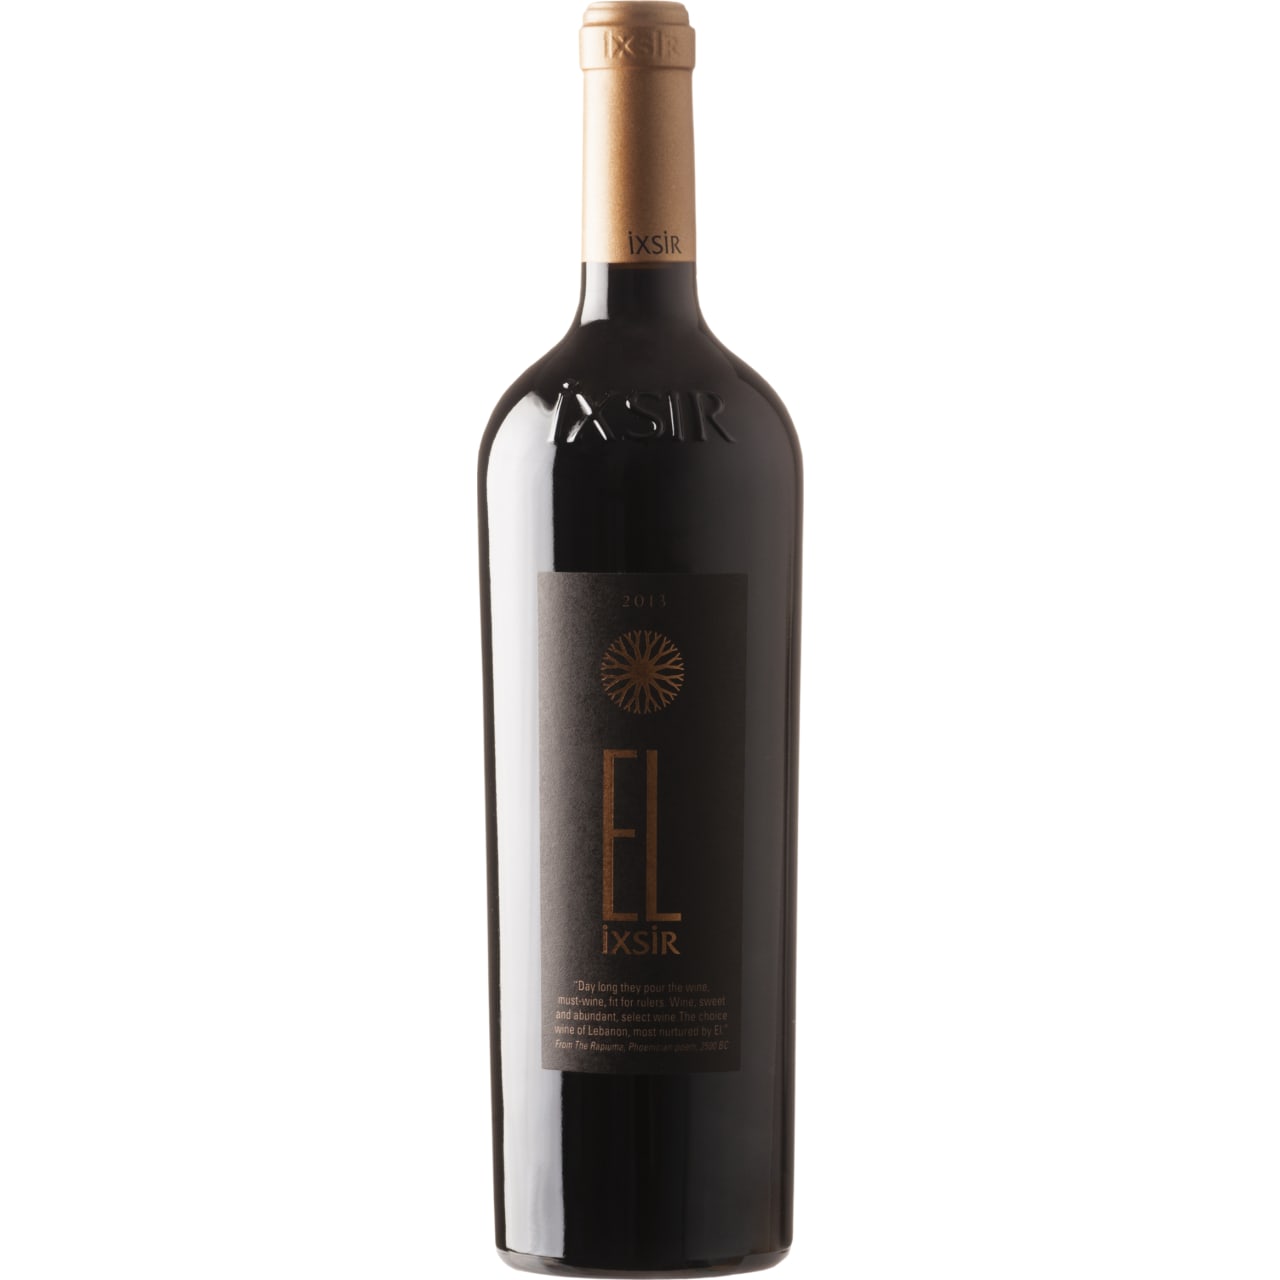 Complex of aromas with red fruits, blackberry liqueur, a touch of incense and notes of mint and cedar sap.